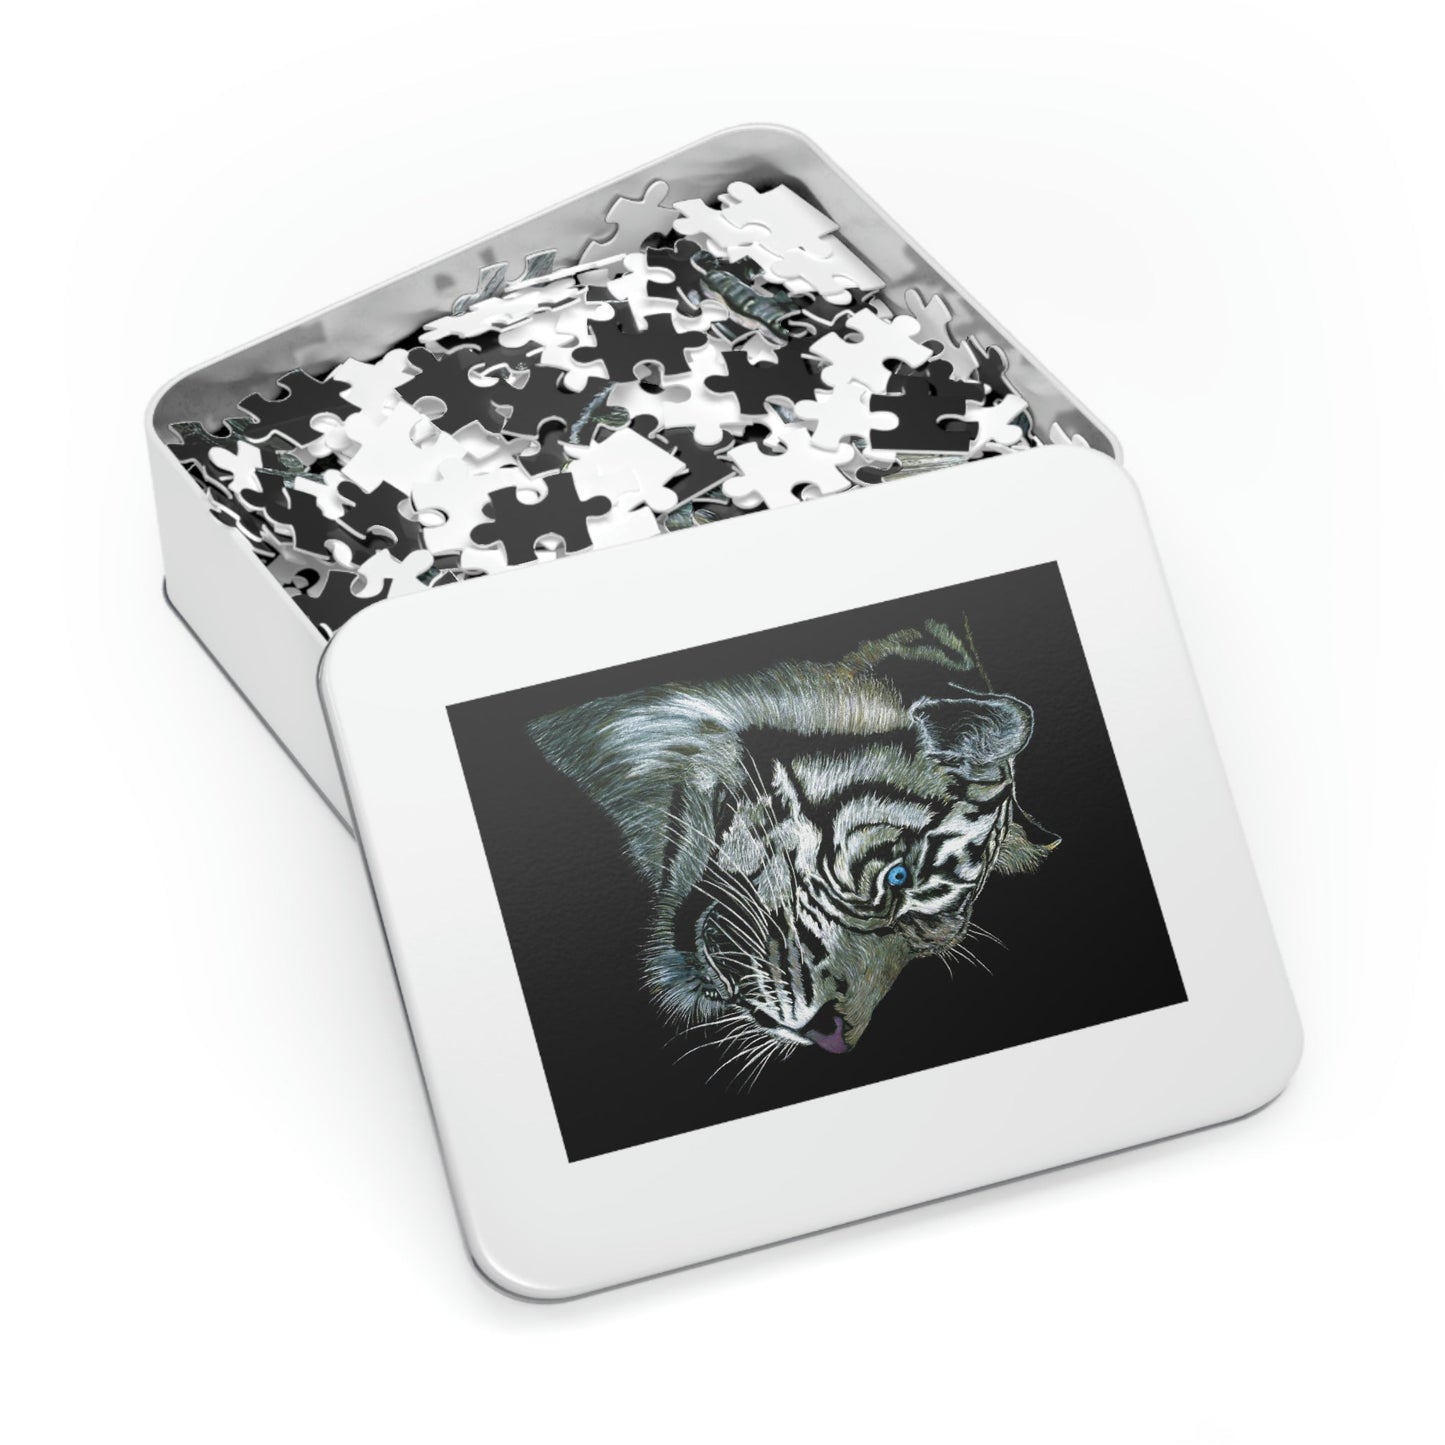 Jigsaw Puzzle - "WHITE TIGER"